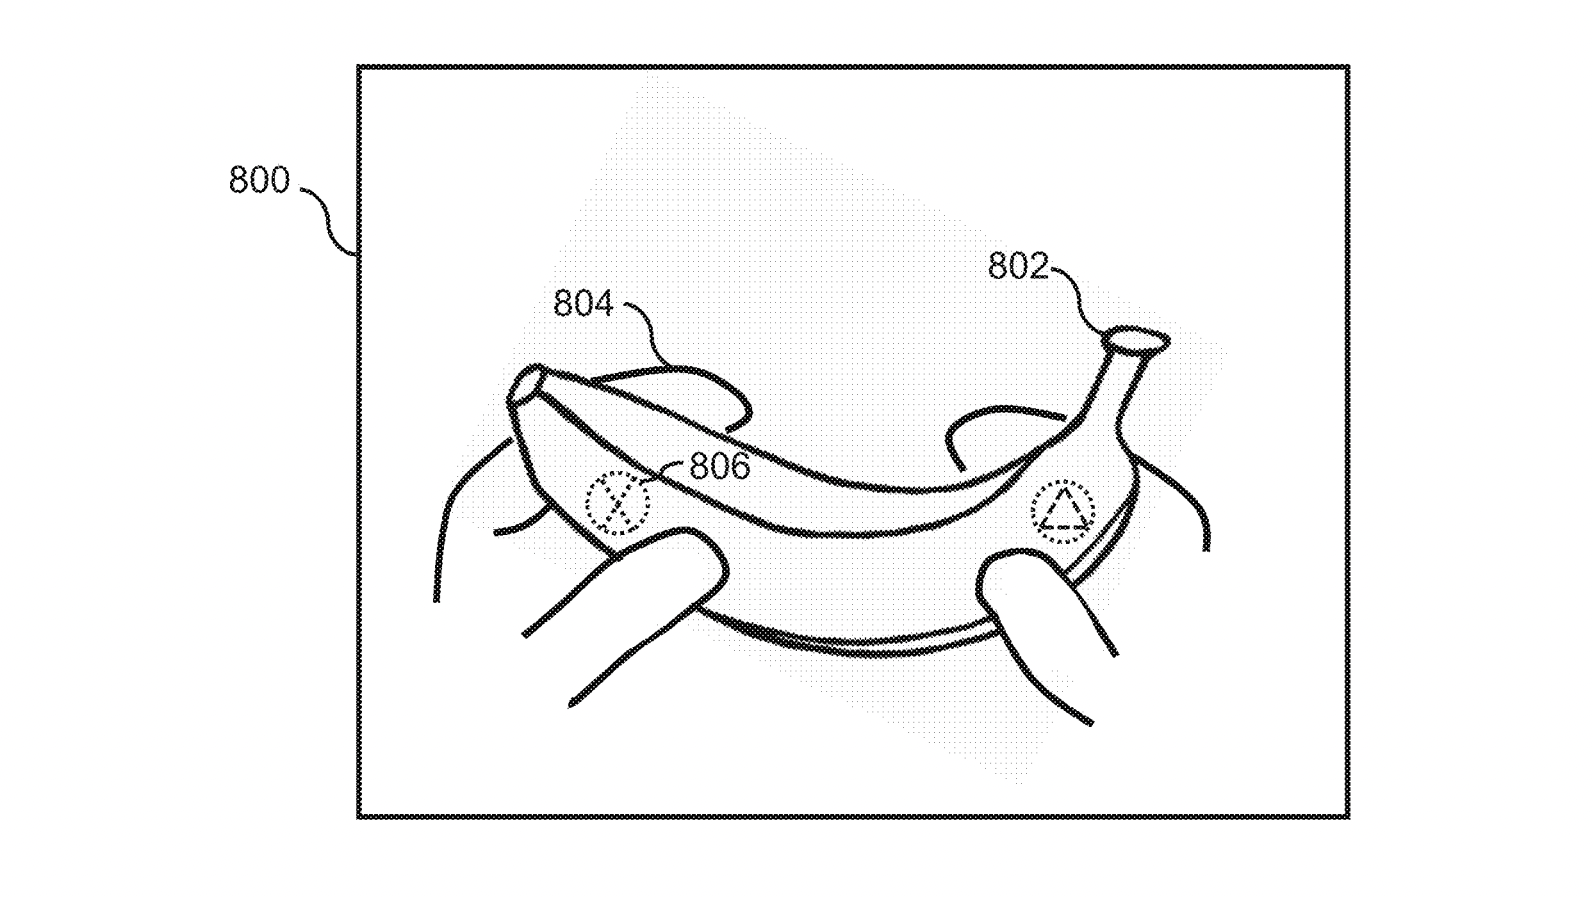 Sony Imagines A Future Where A Banana Is A Video Game Controller